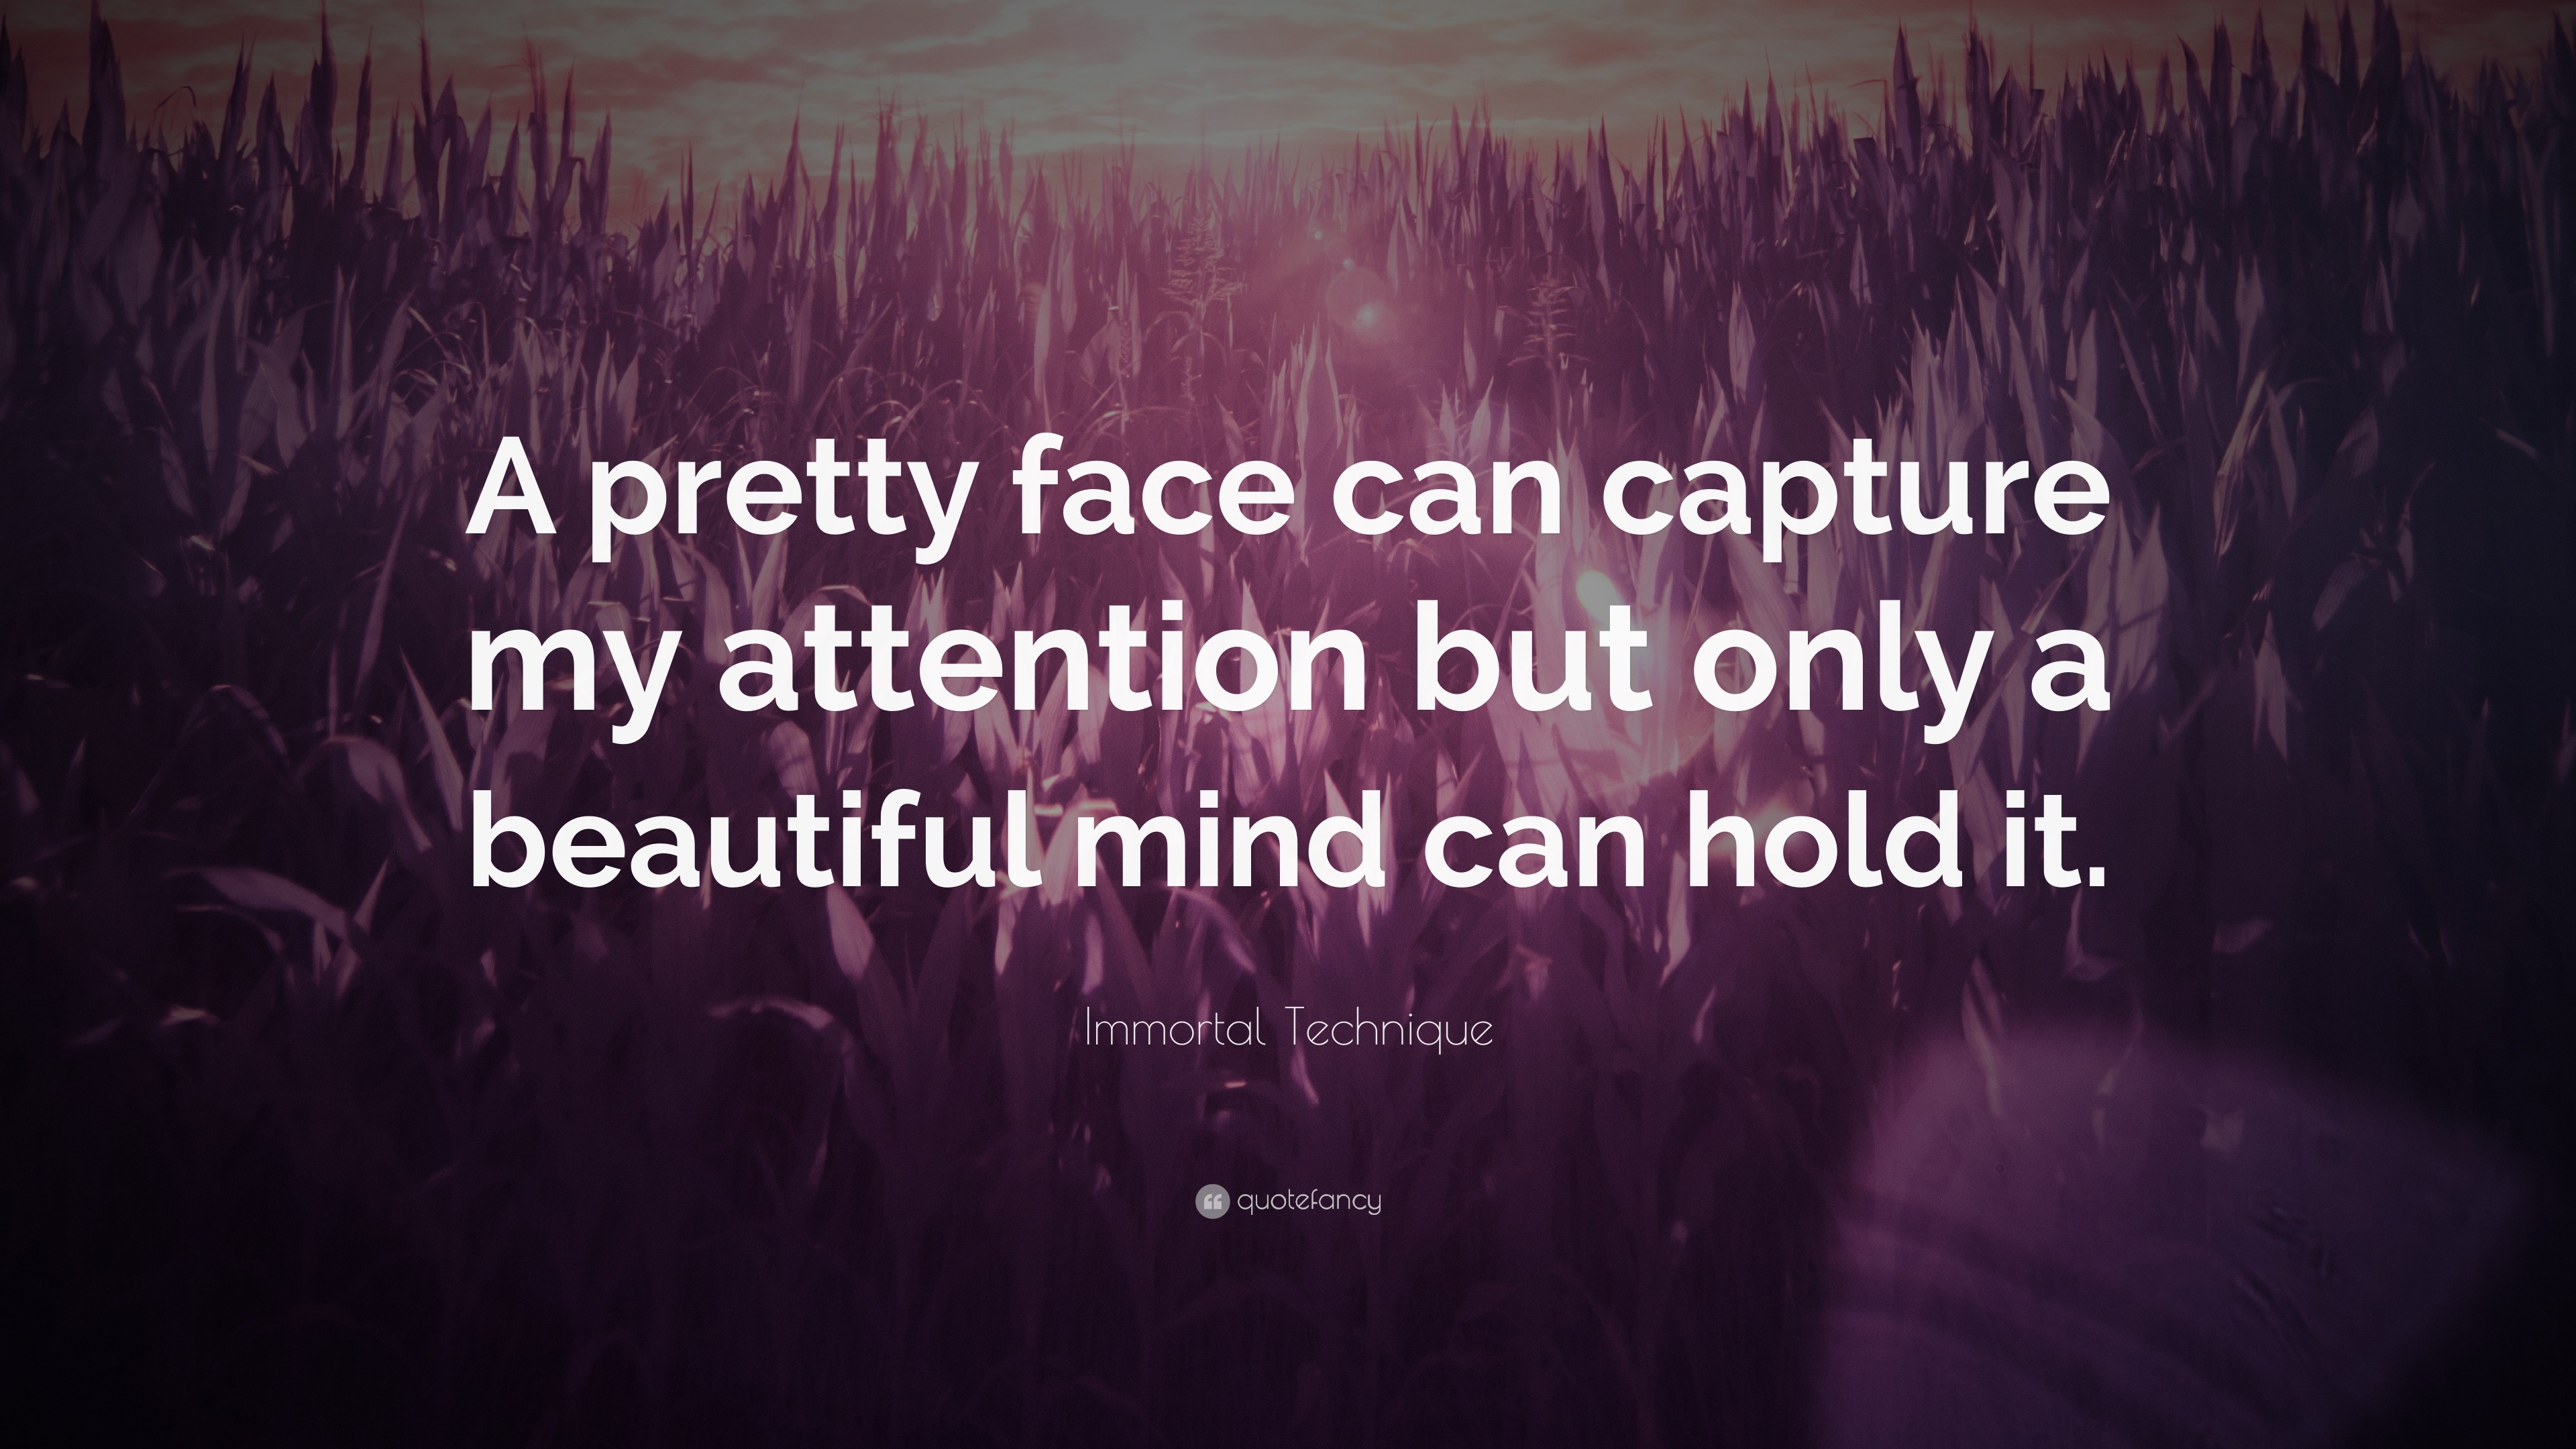 Immortal Technique Quote: “A pretty face can capture my attention but only a  beautiful mind can